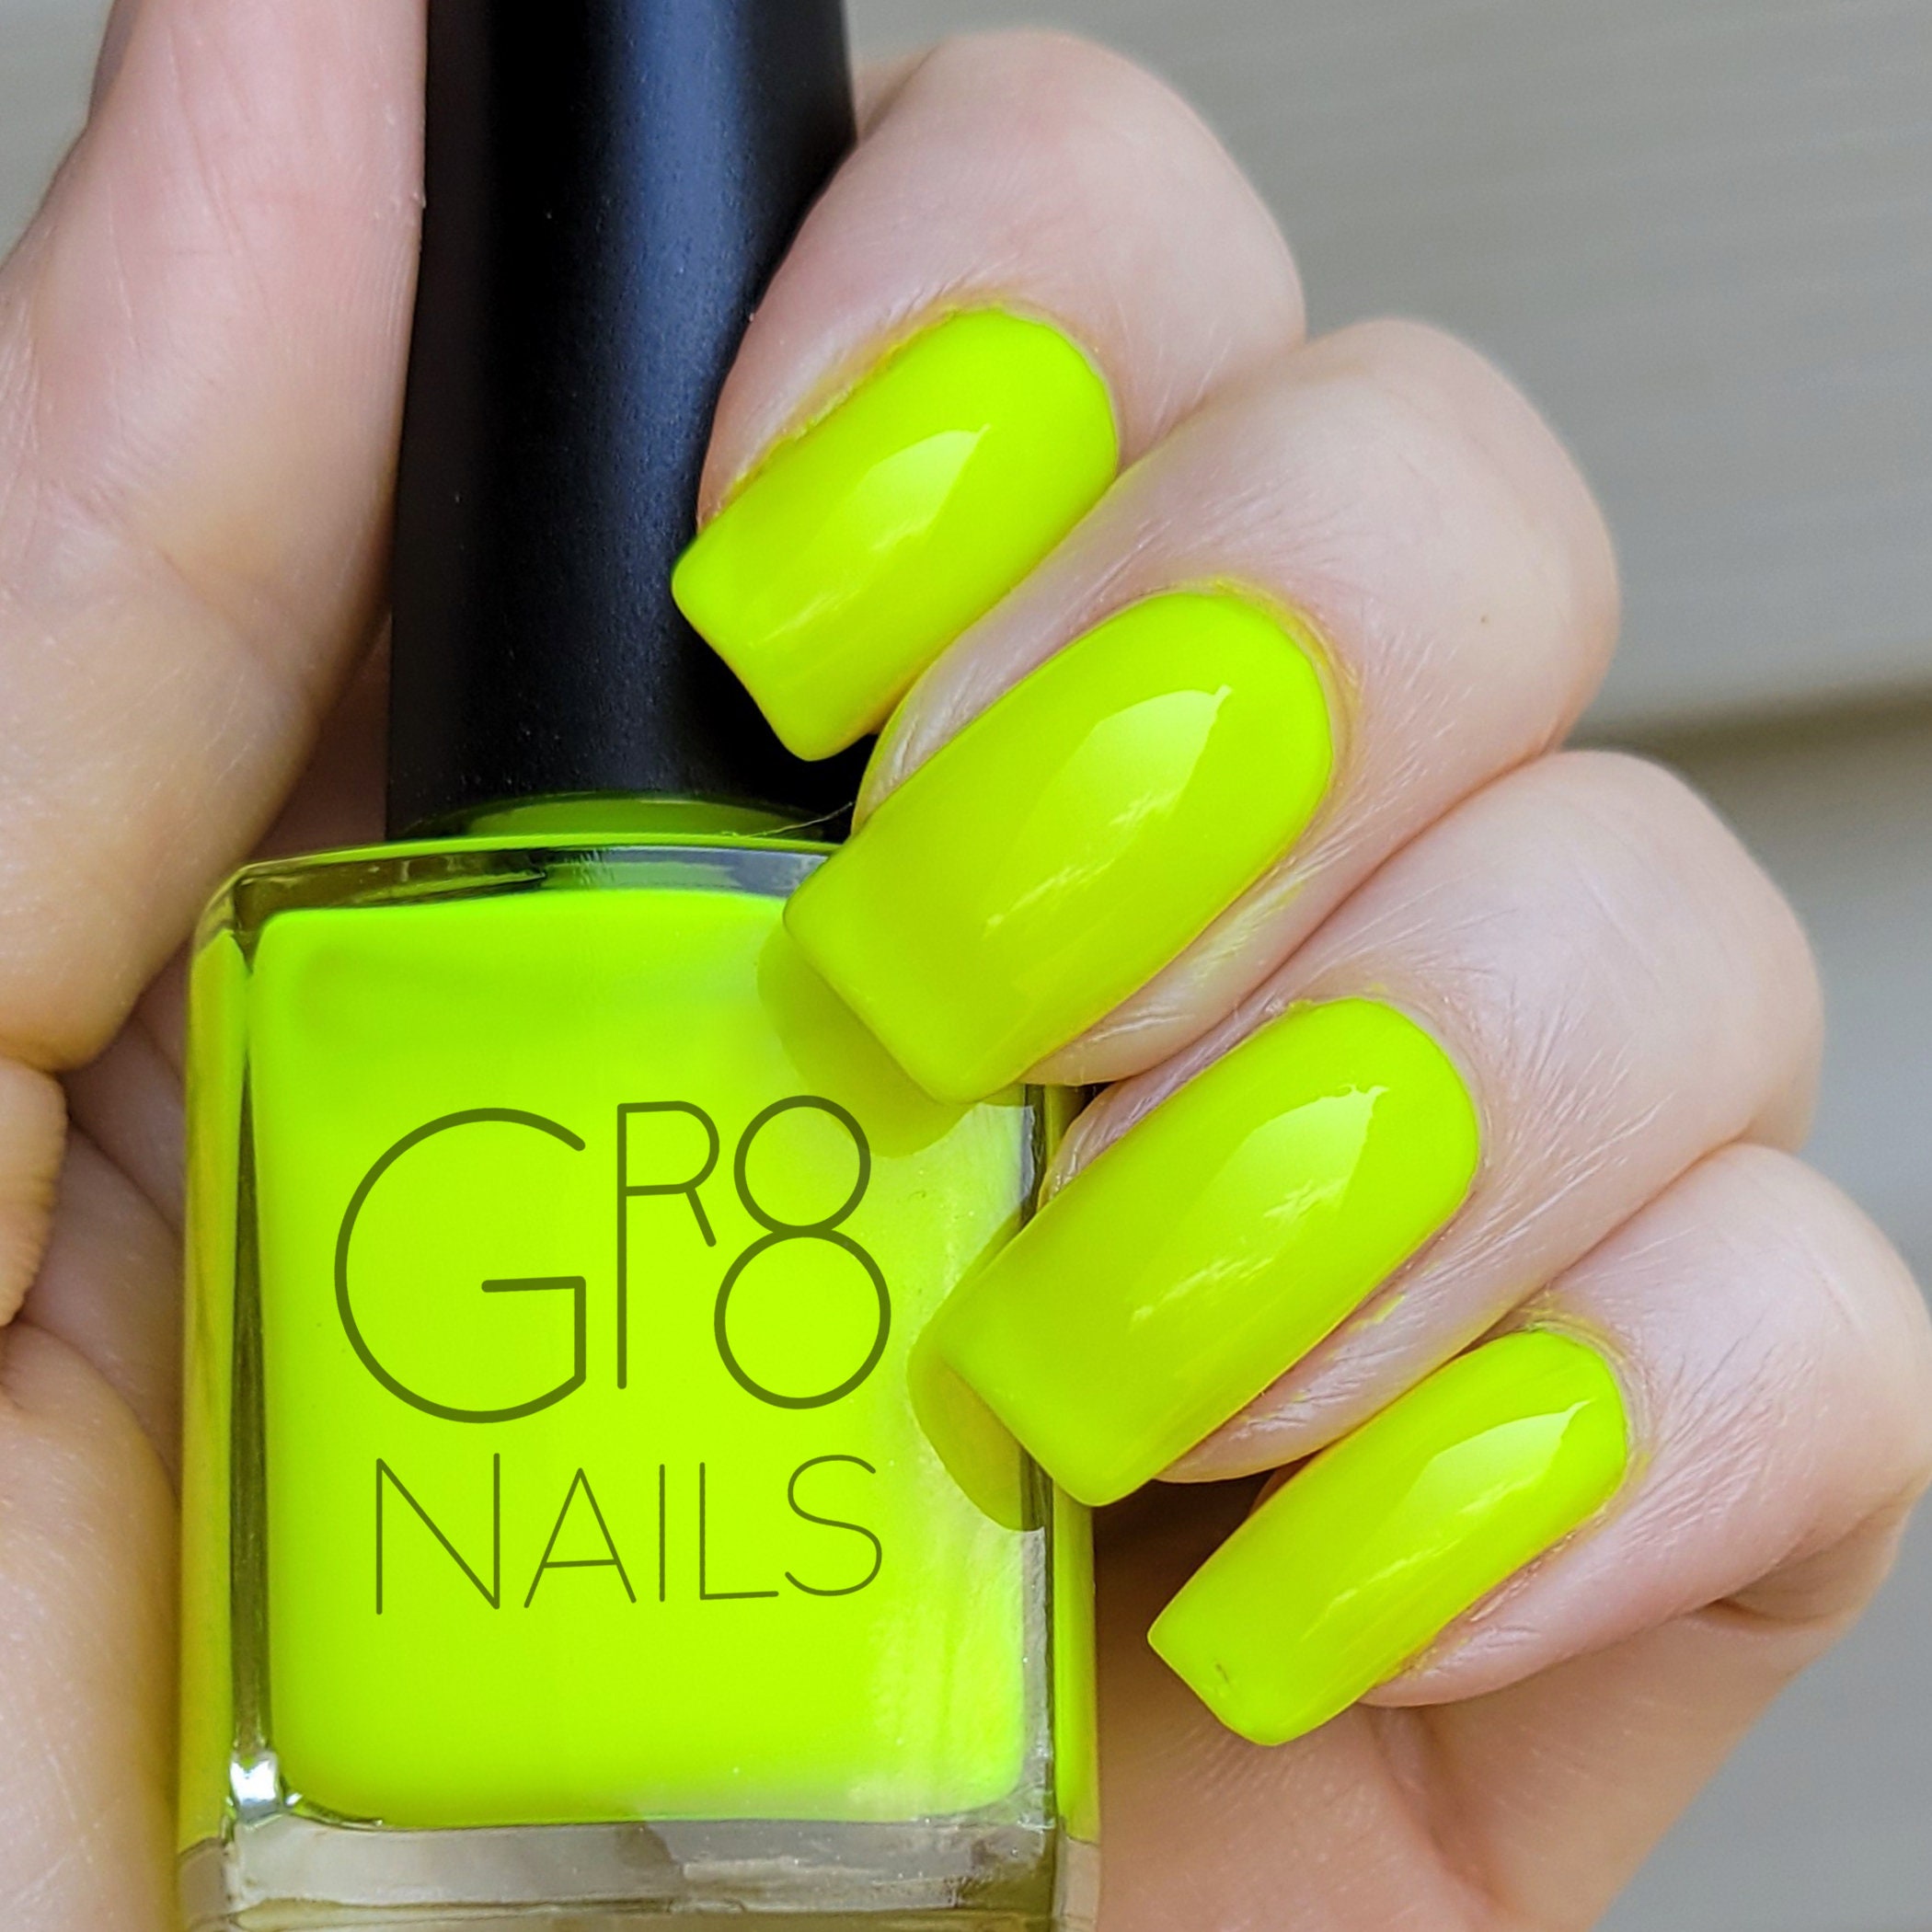 FINGER PAINTS Guggen I'm Lime YELLOW Nail Polish 806164 SHIPS TODAY